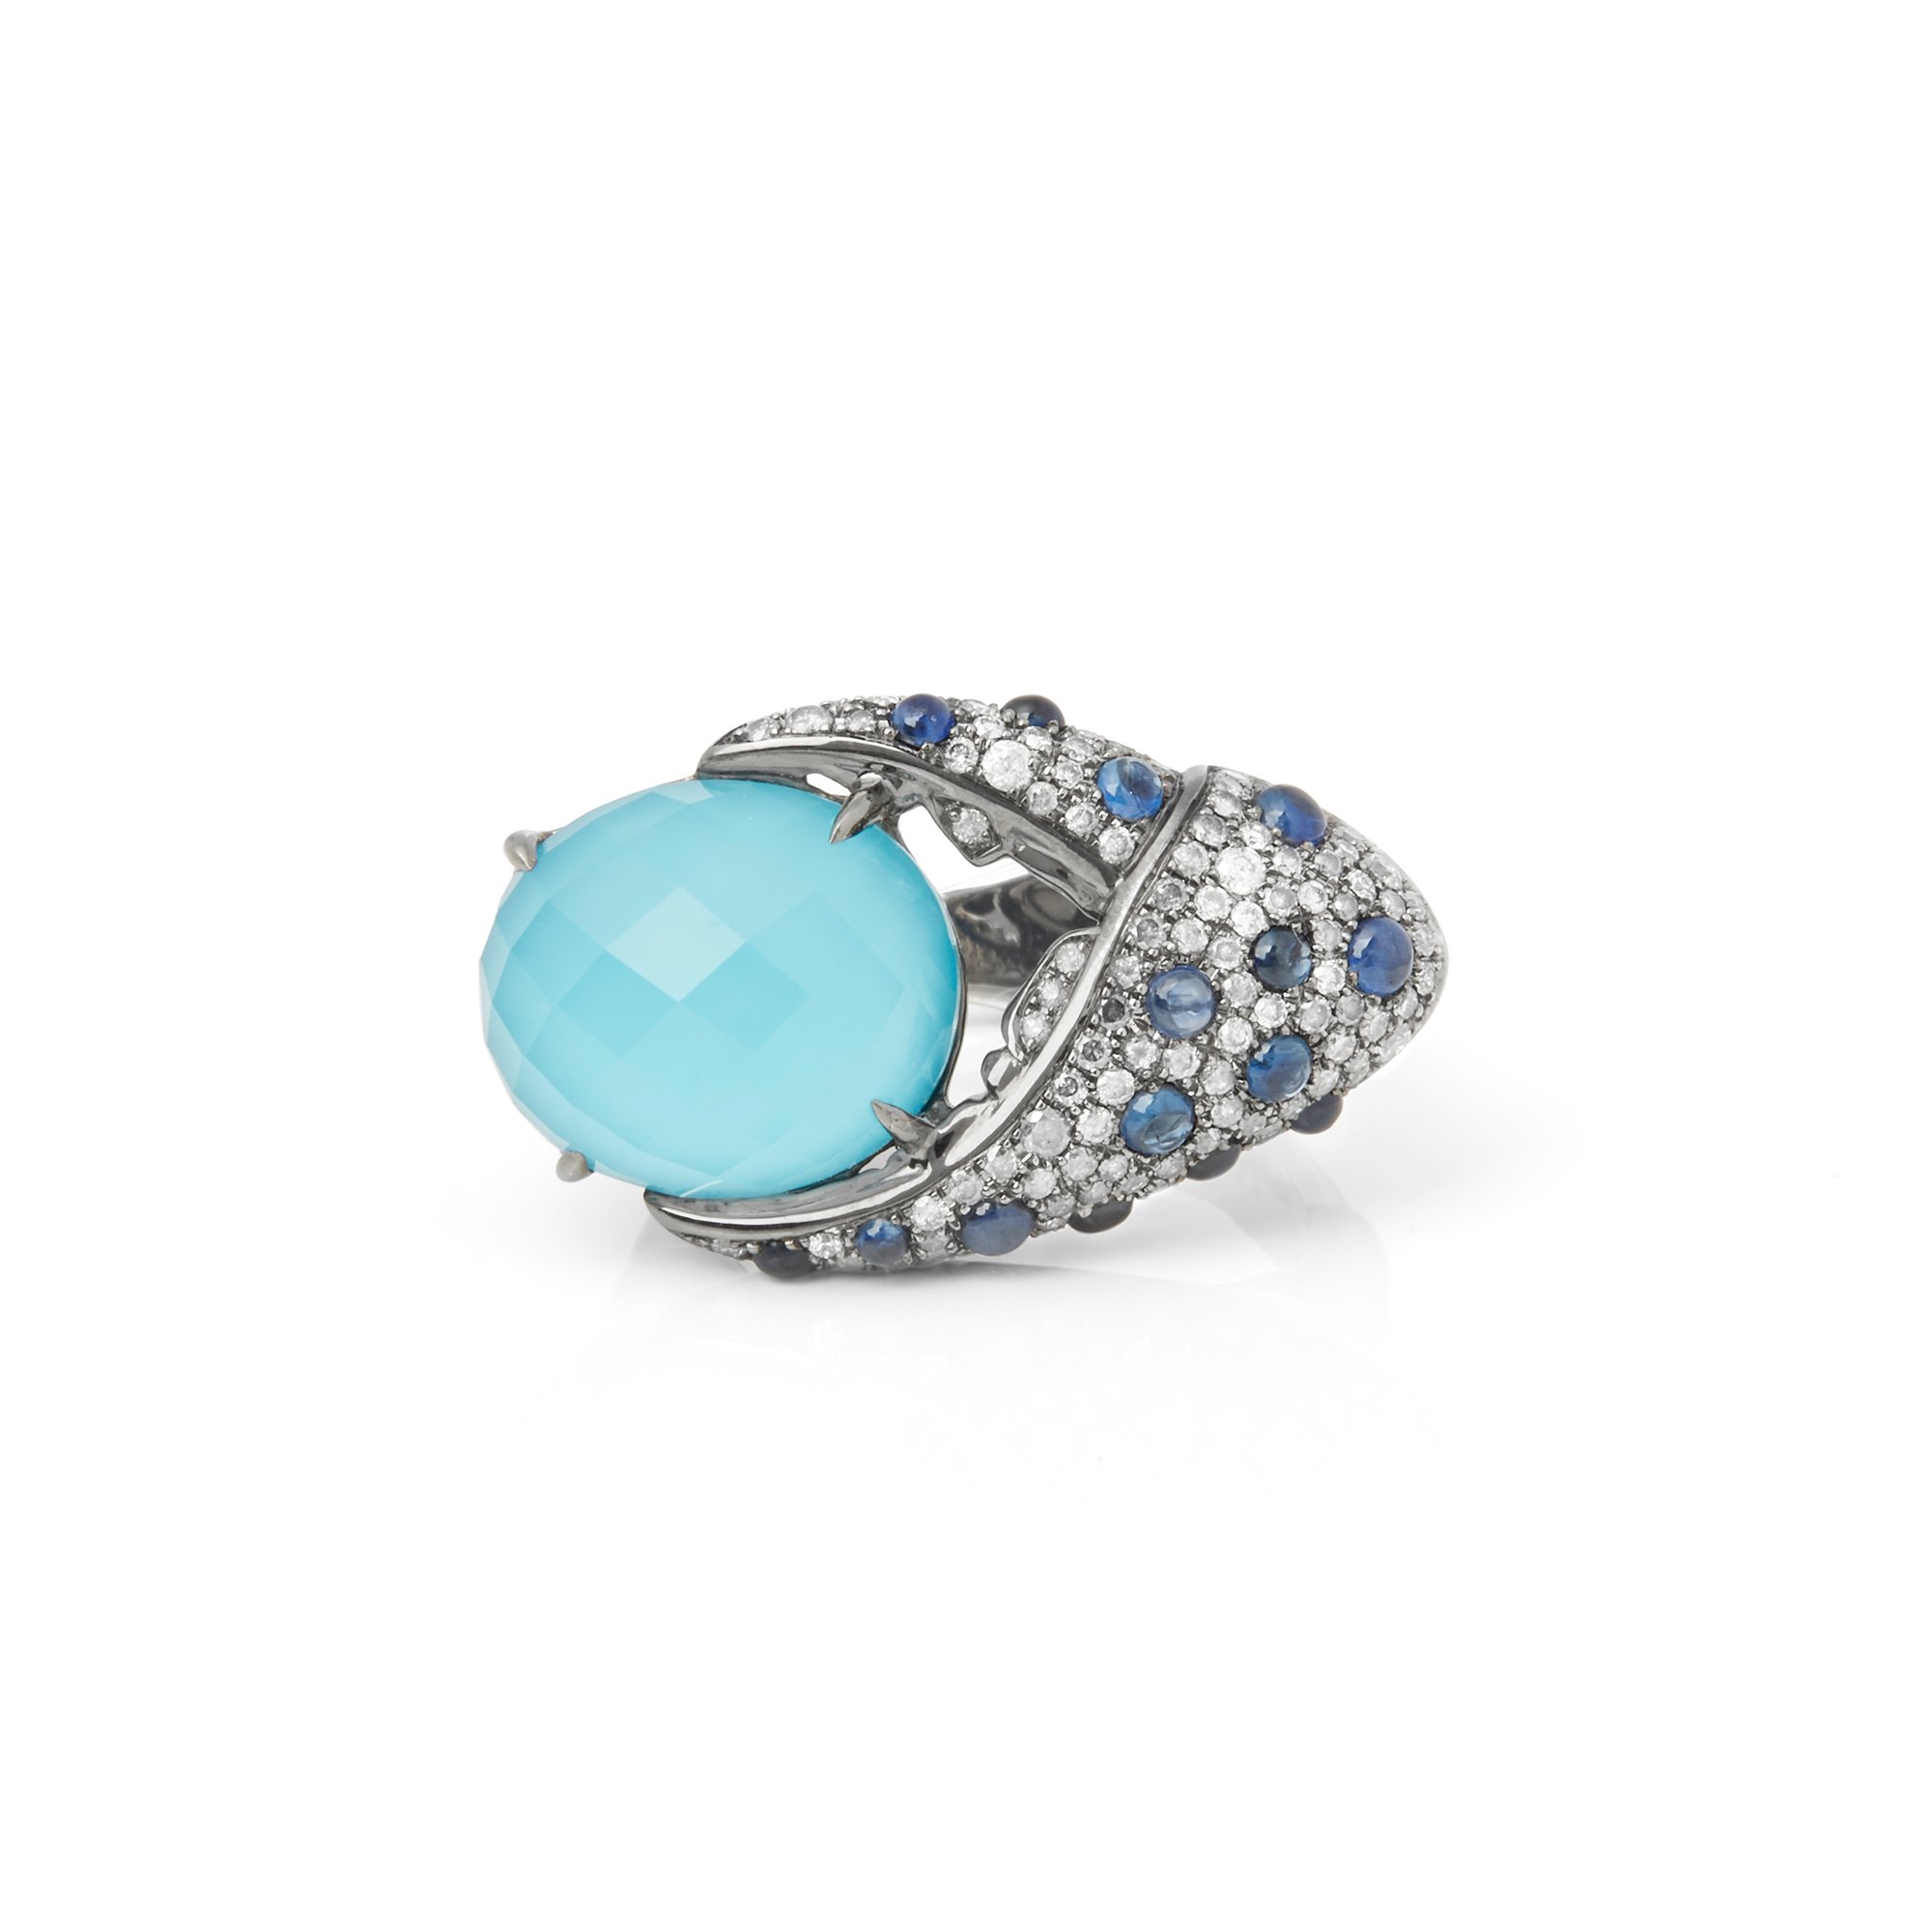 Stephen Webster 18k White Gold Jewels Verne Turquoise and Blue Sapphire Ring